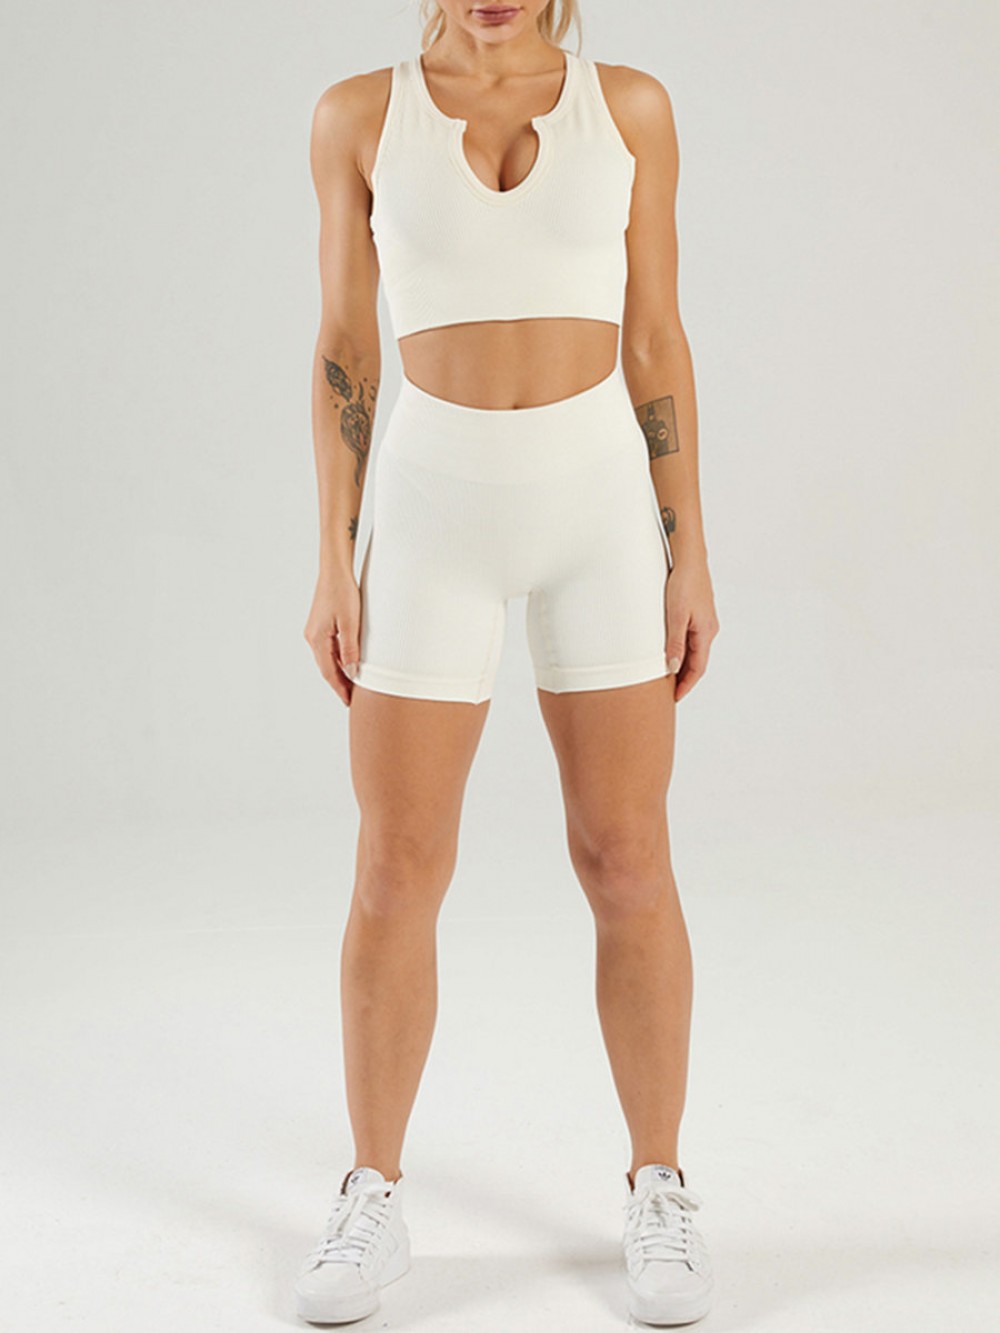 Creamy-White Seamless Yoga Bra Low Neck And Shorts Suit Comfort